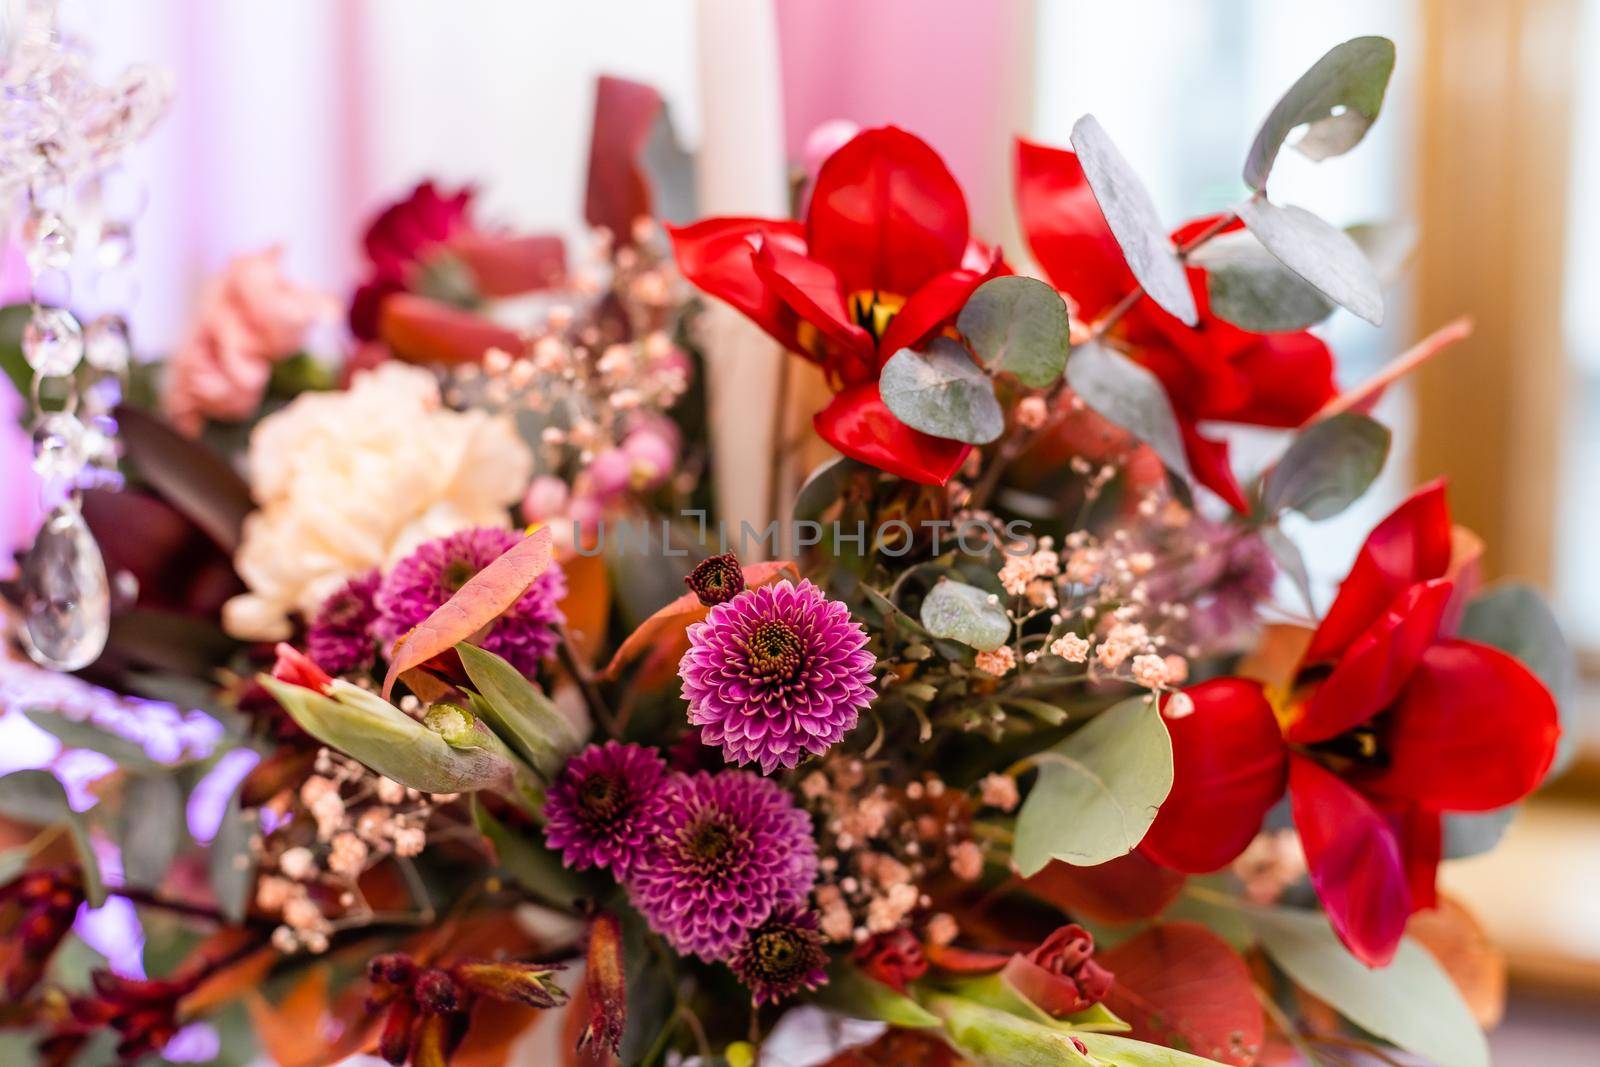 Rustic wedding decoration for festive table with beautiful flower composition. Autumn wedding